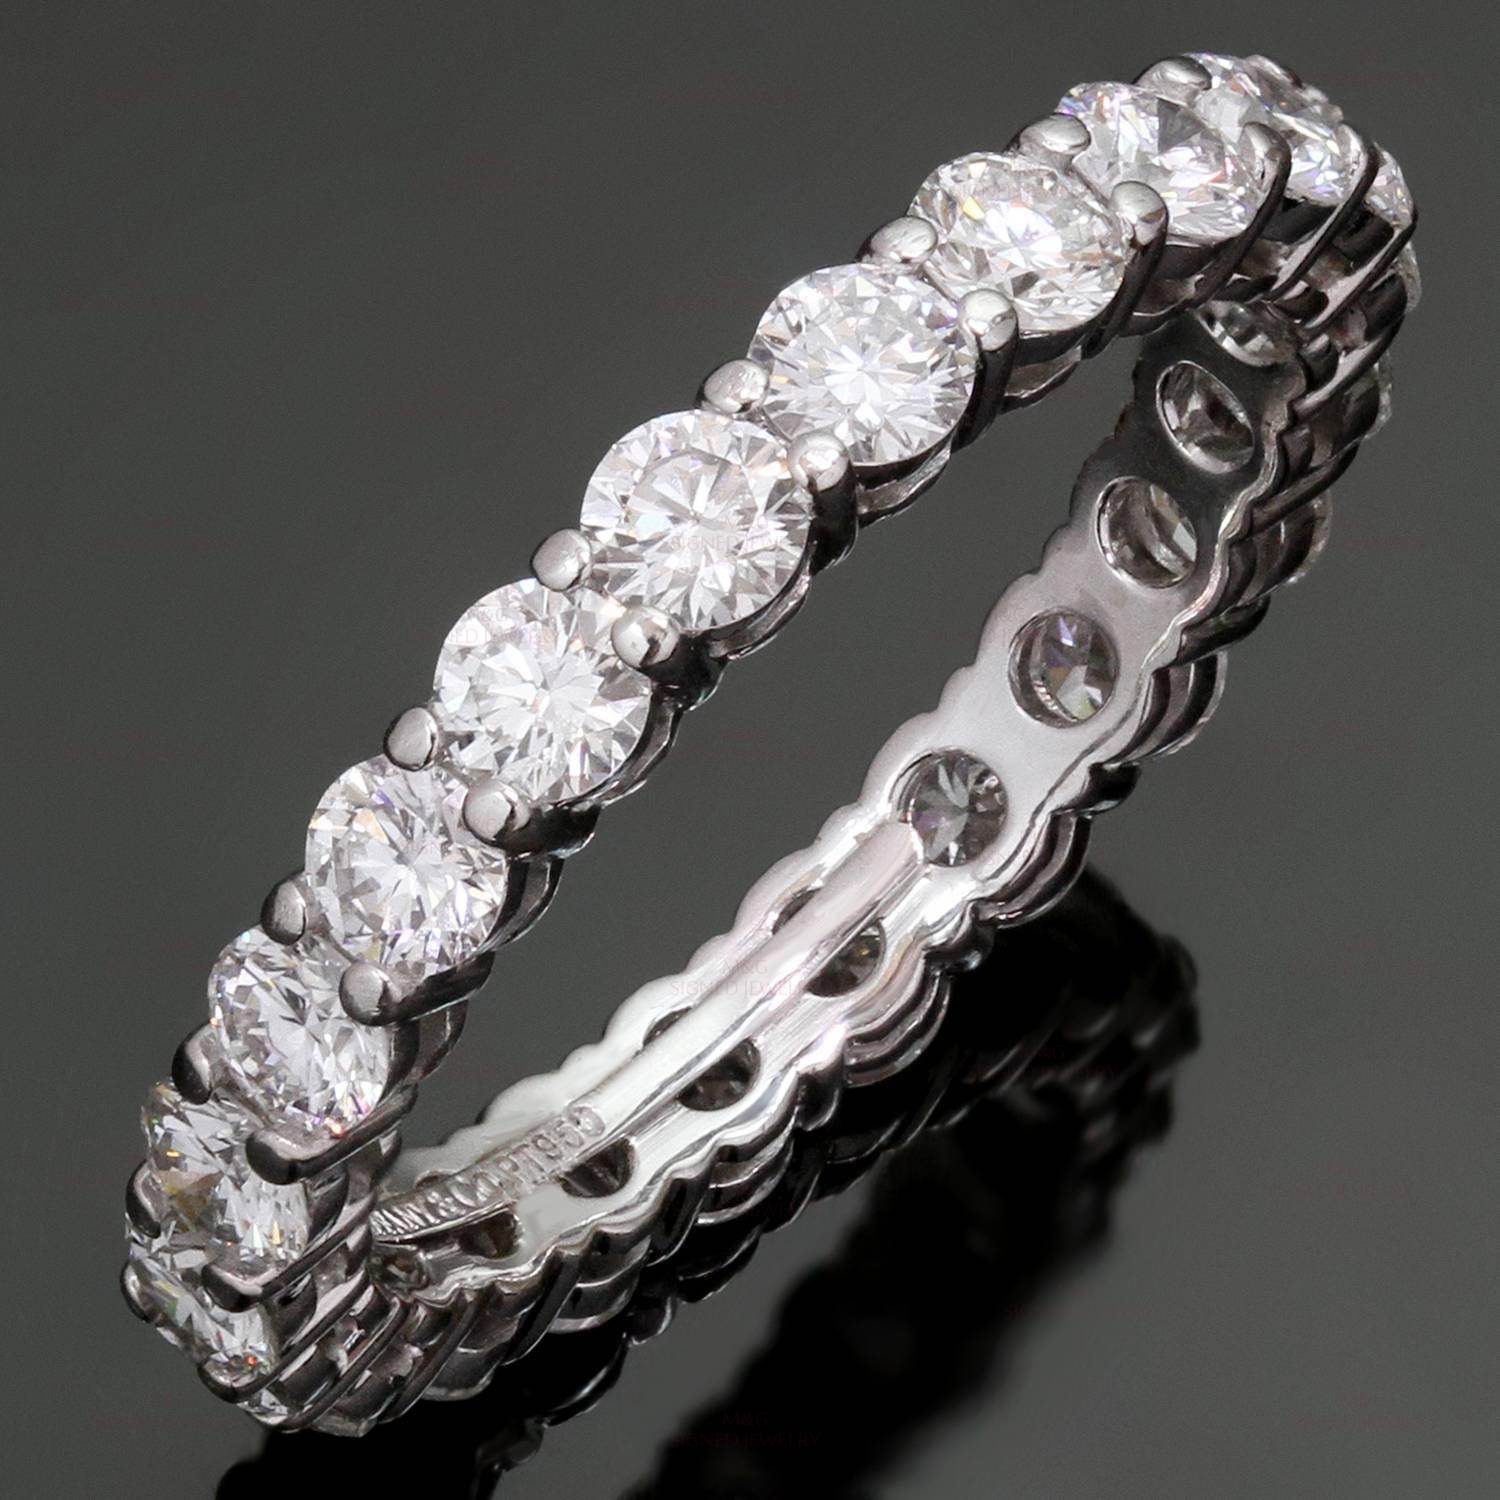 This gorgeous Tiffany band ring from the iconic embrace collection is crafted in platinum and features a full circle 22 round brilliant-cut diamonds of an estimated 1.80 carats. Made in United States circa 2010s. Measurements: 0.11